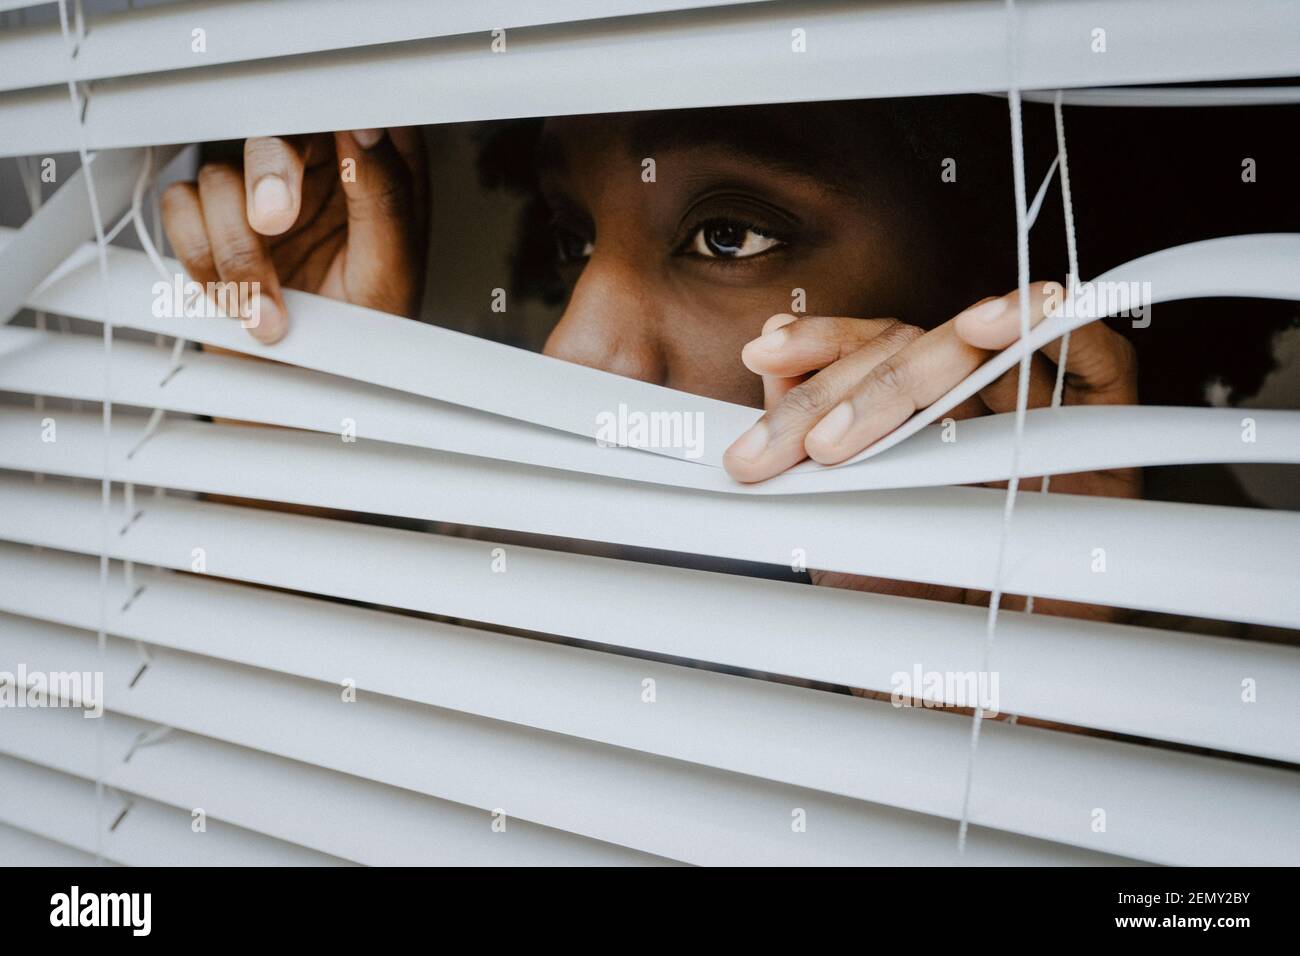 Depressed woman looking through window blinds Stock Photo